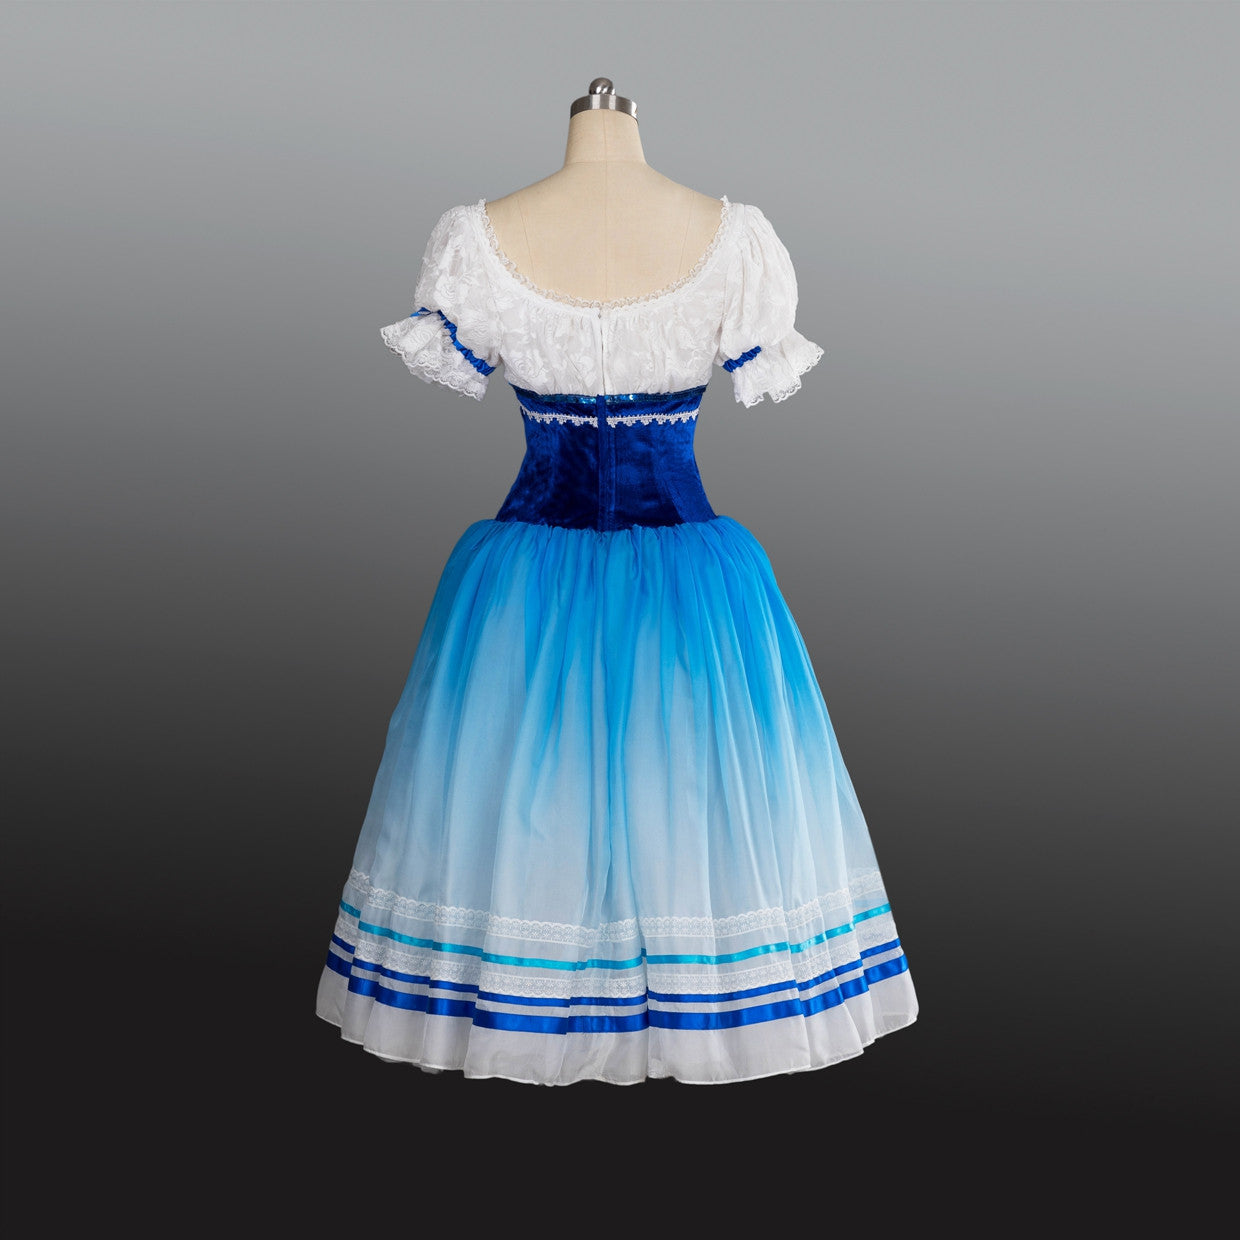 Giselle Peasant variations Act 1 - Dancewear by Patricia